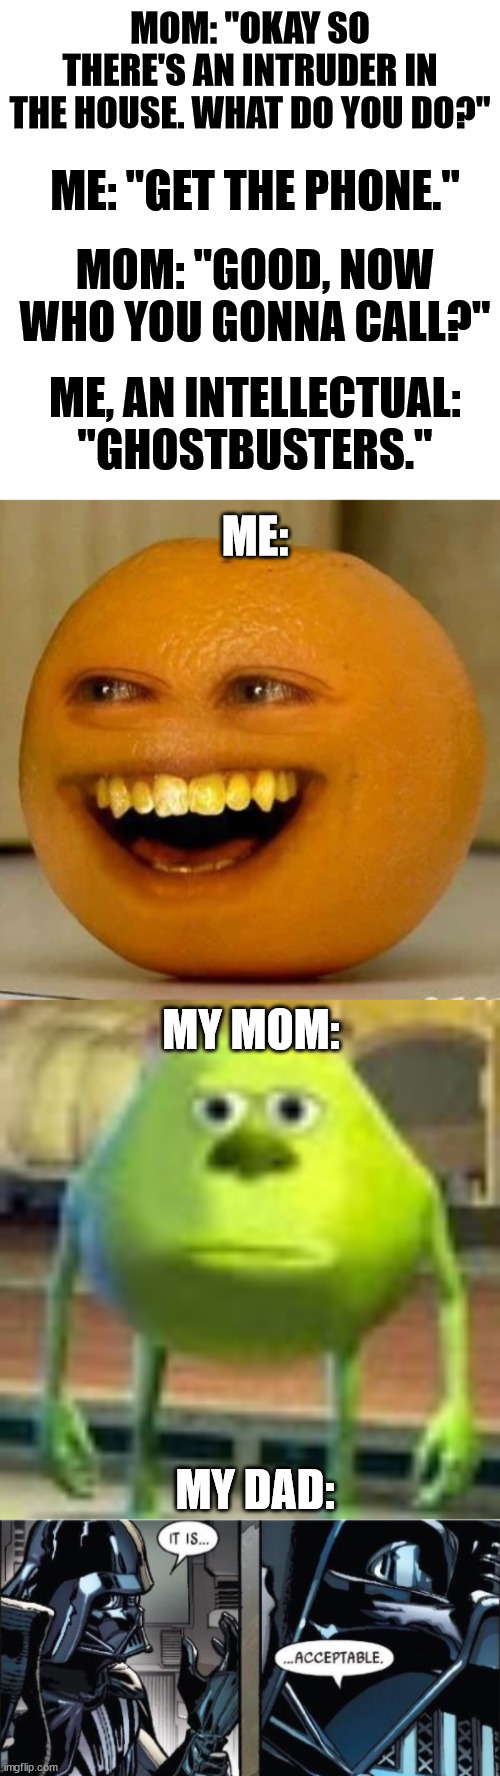 Dads are cool like that | MOM: "OKAY SO THERE'S AN INTRUDER IN THE HOUSE. WHAT DO YOU DO?"; ME: "GET THE PHONE."; MOM: "GOOD, NOW WHO YOU GONNA CALL?"; ME:; ME, AN INTELLECTUAL: "GHOSTBUSTERS."; MY MOM:; MY DAD: | image tagged in annoying orange,sully wazowski,it is acceptable,ghostbusters | made w/ Imgflip meme maker